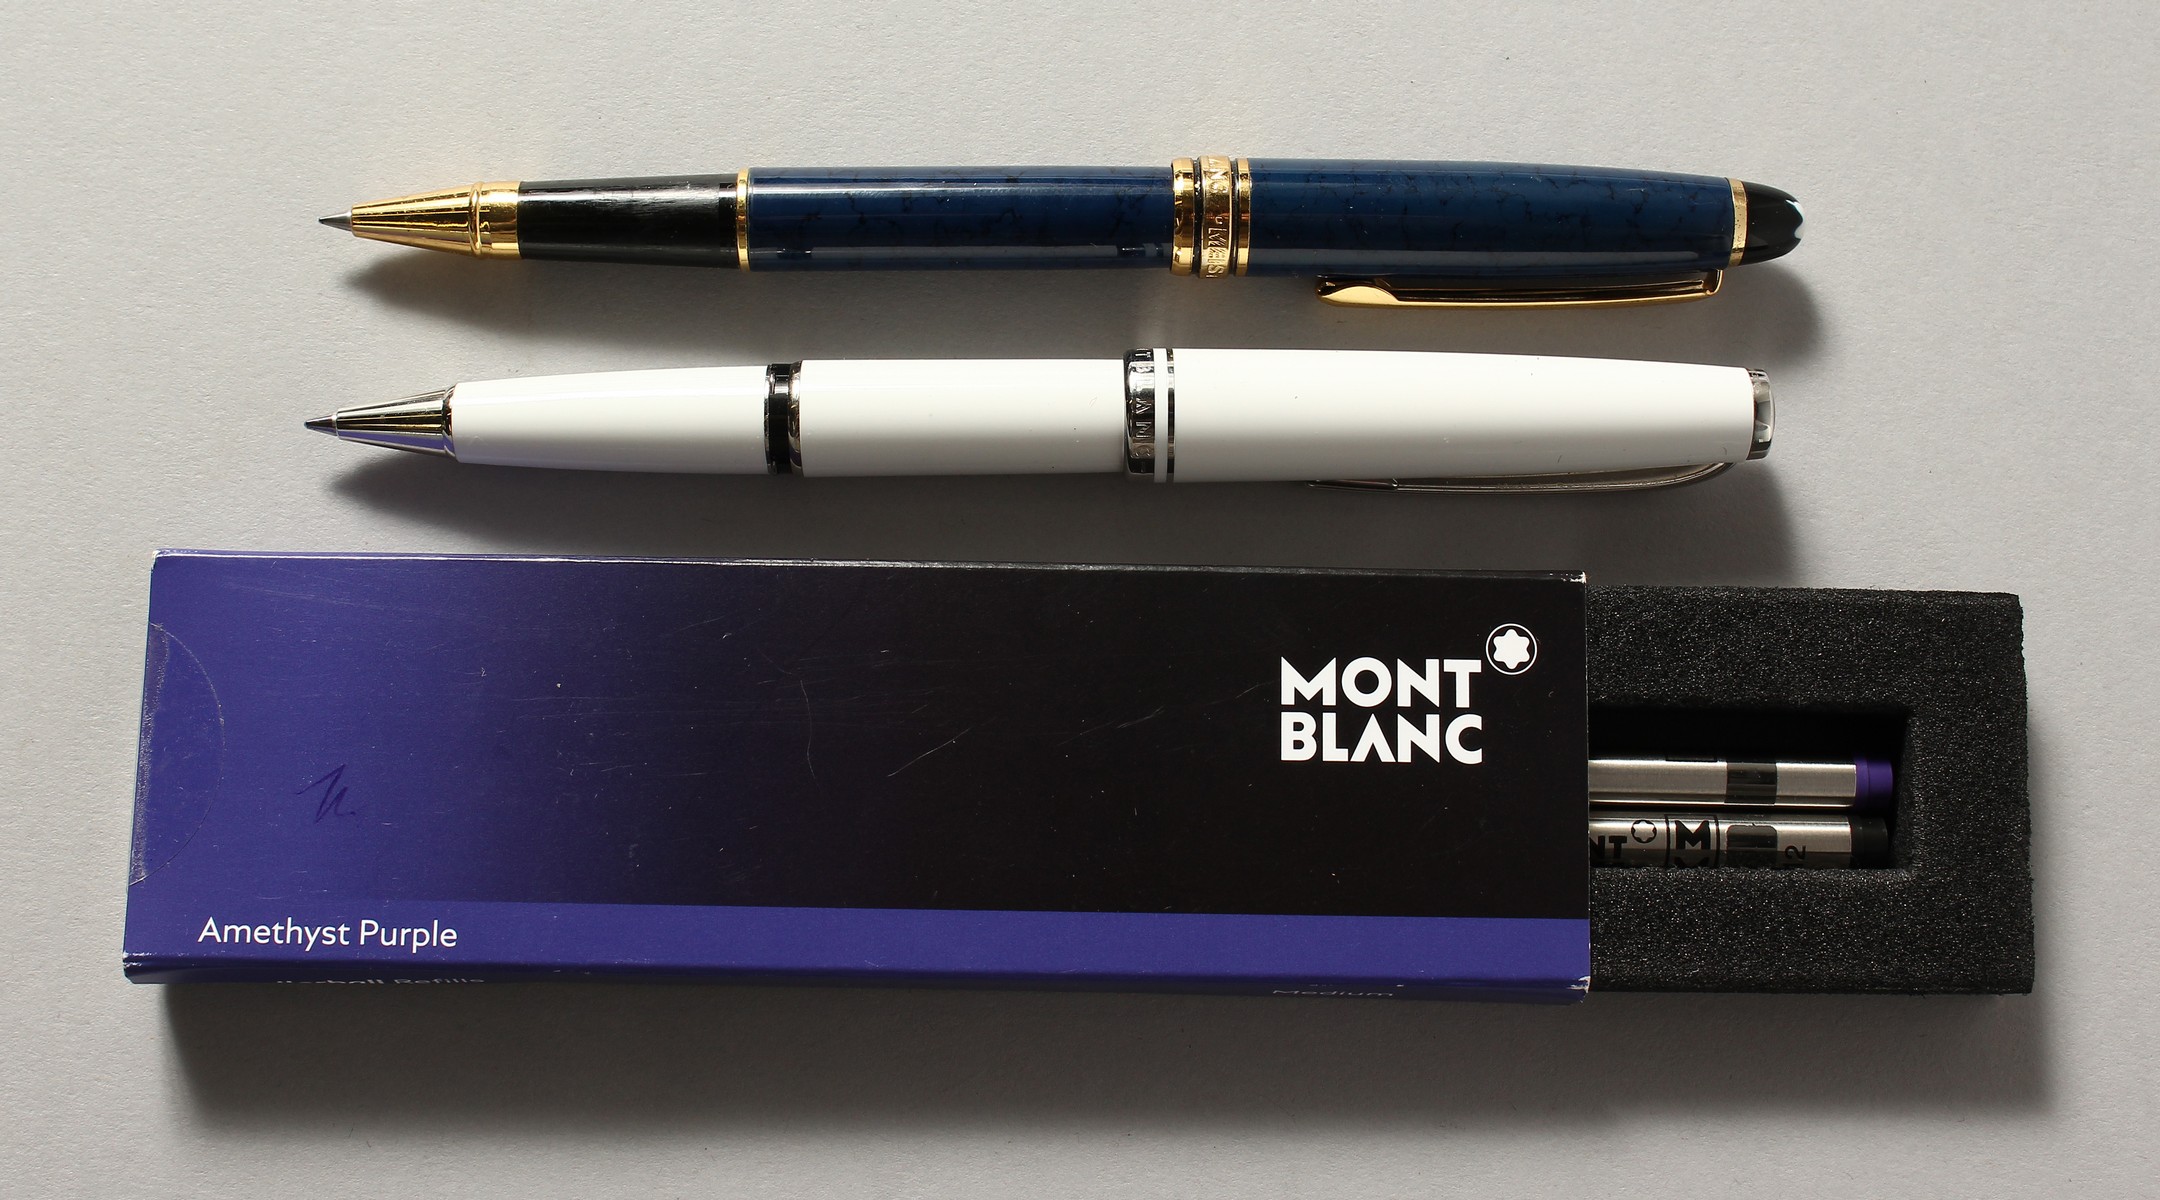 TWO MONT BLANC PENS with refills.